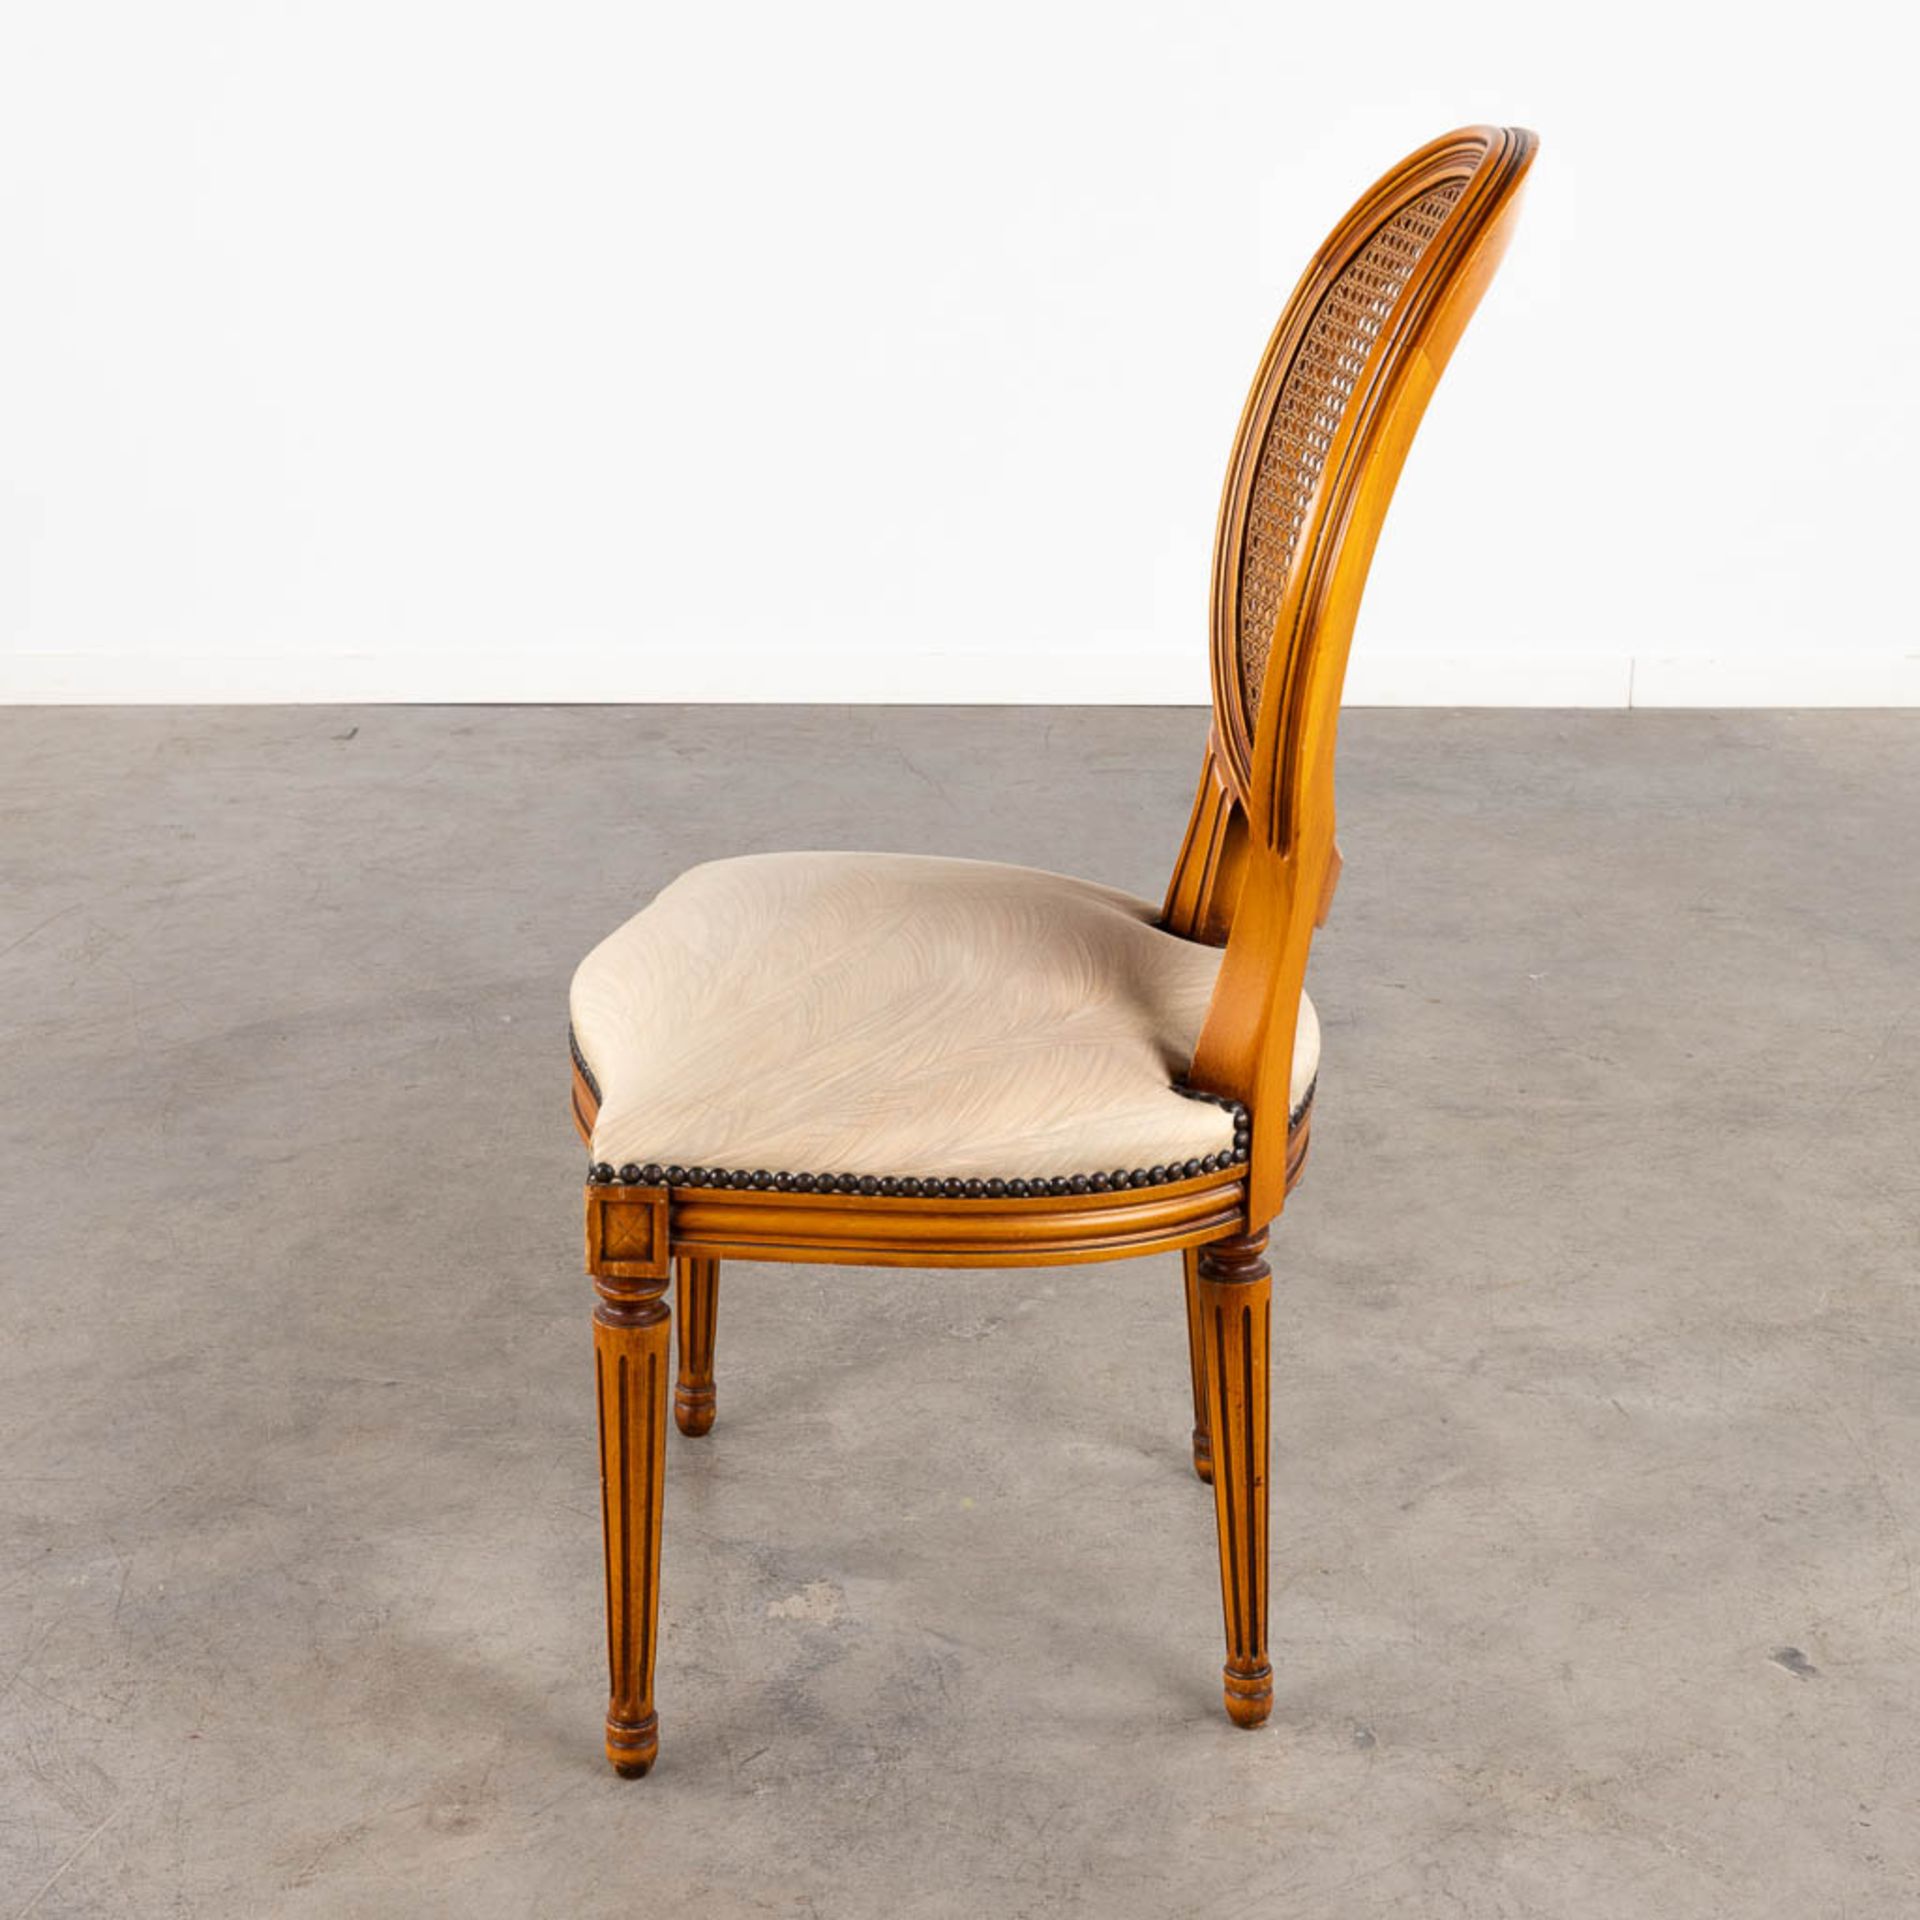 Giorgetti, 8 chairs, Louis XVI style finished with caning. (D:48 x W:48 x H:95 cm) - Image 7 of 13